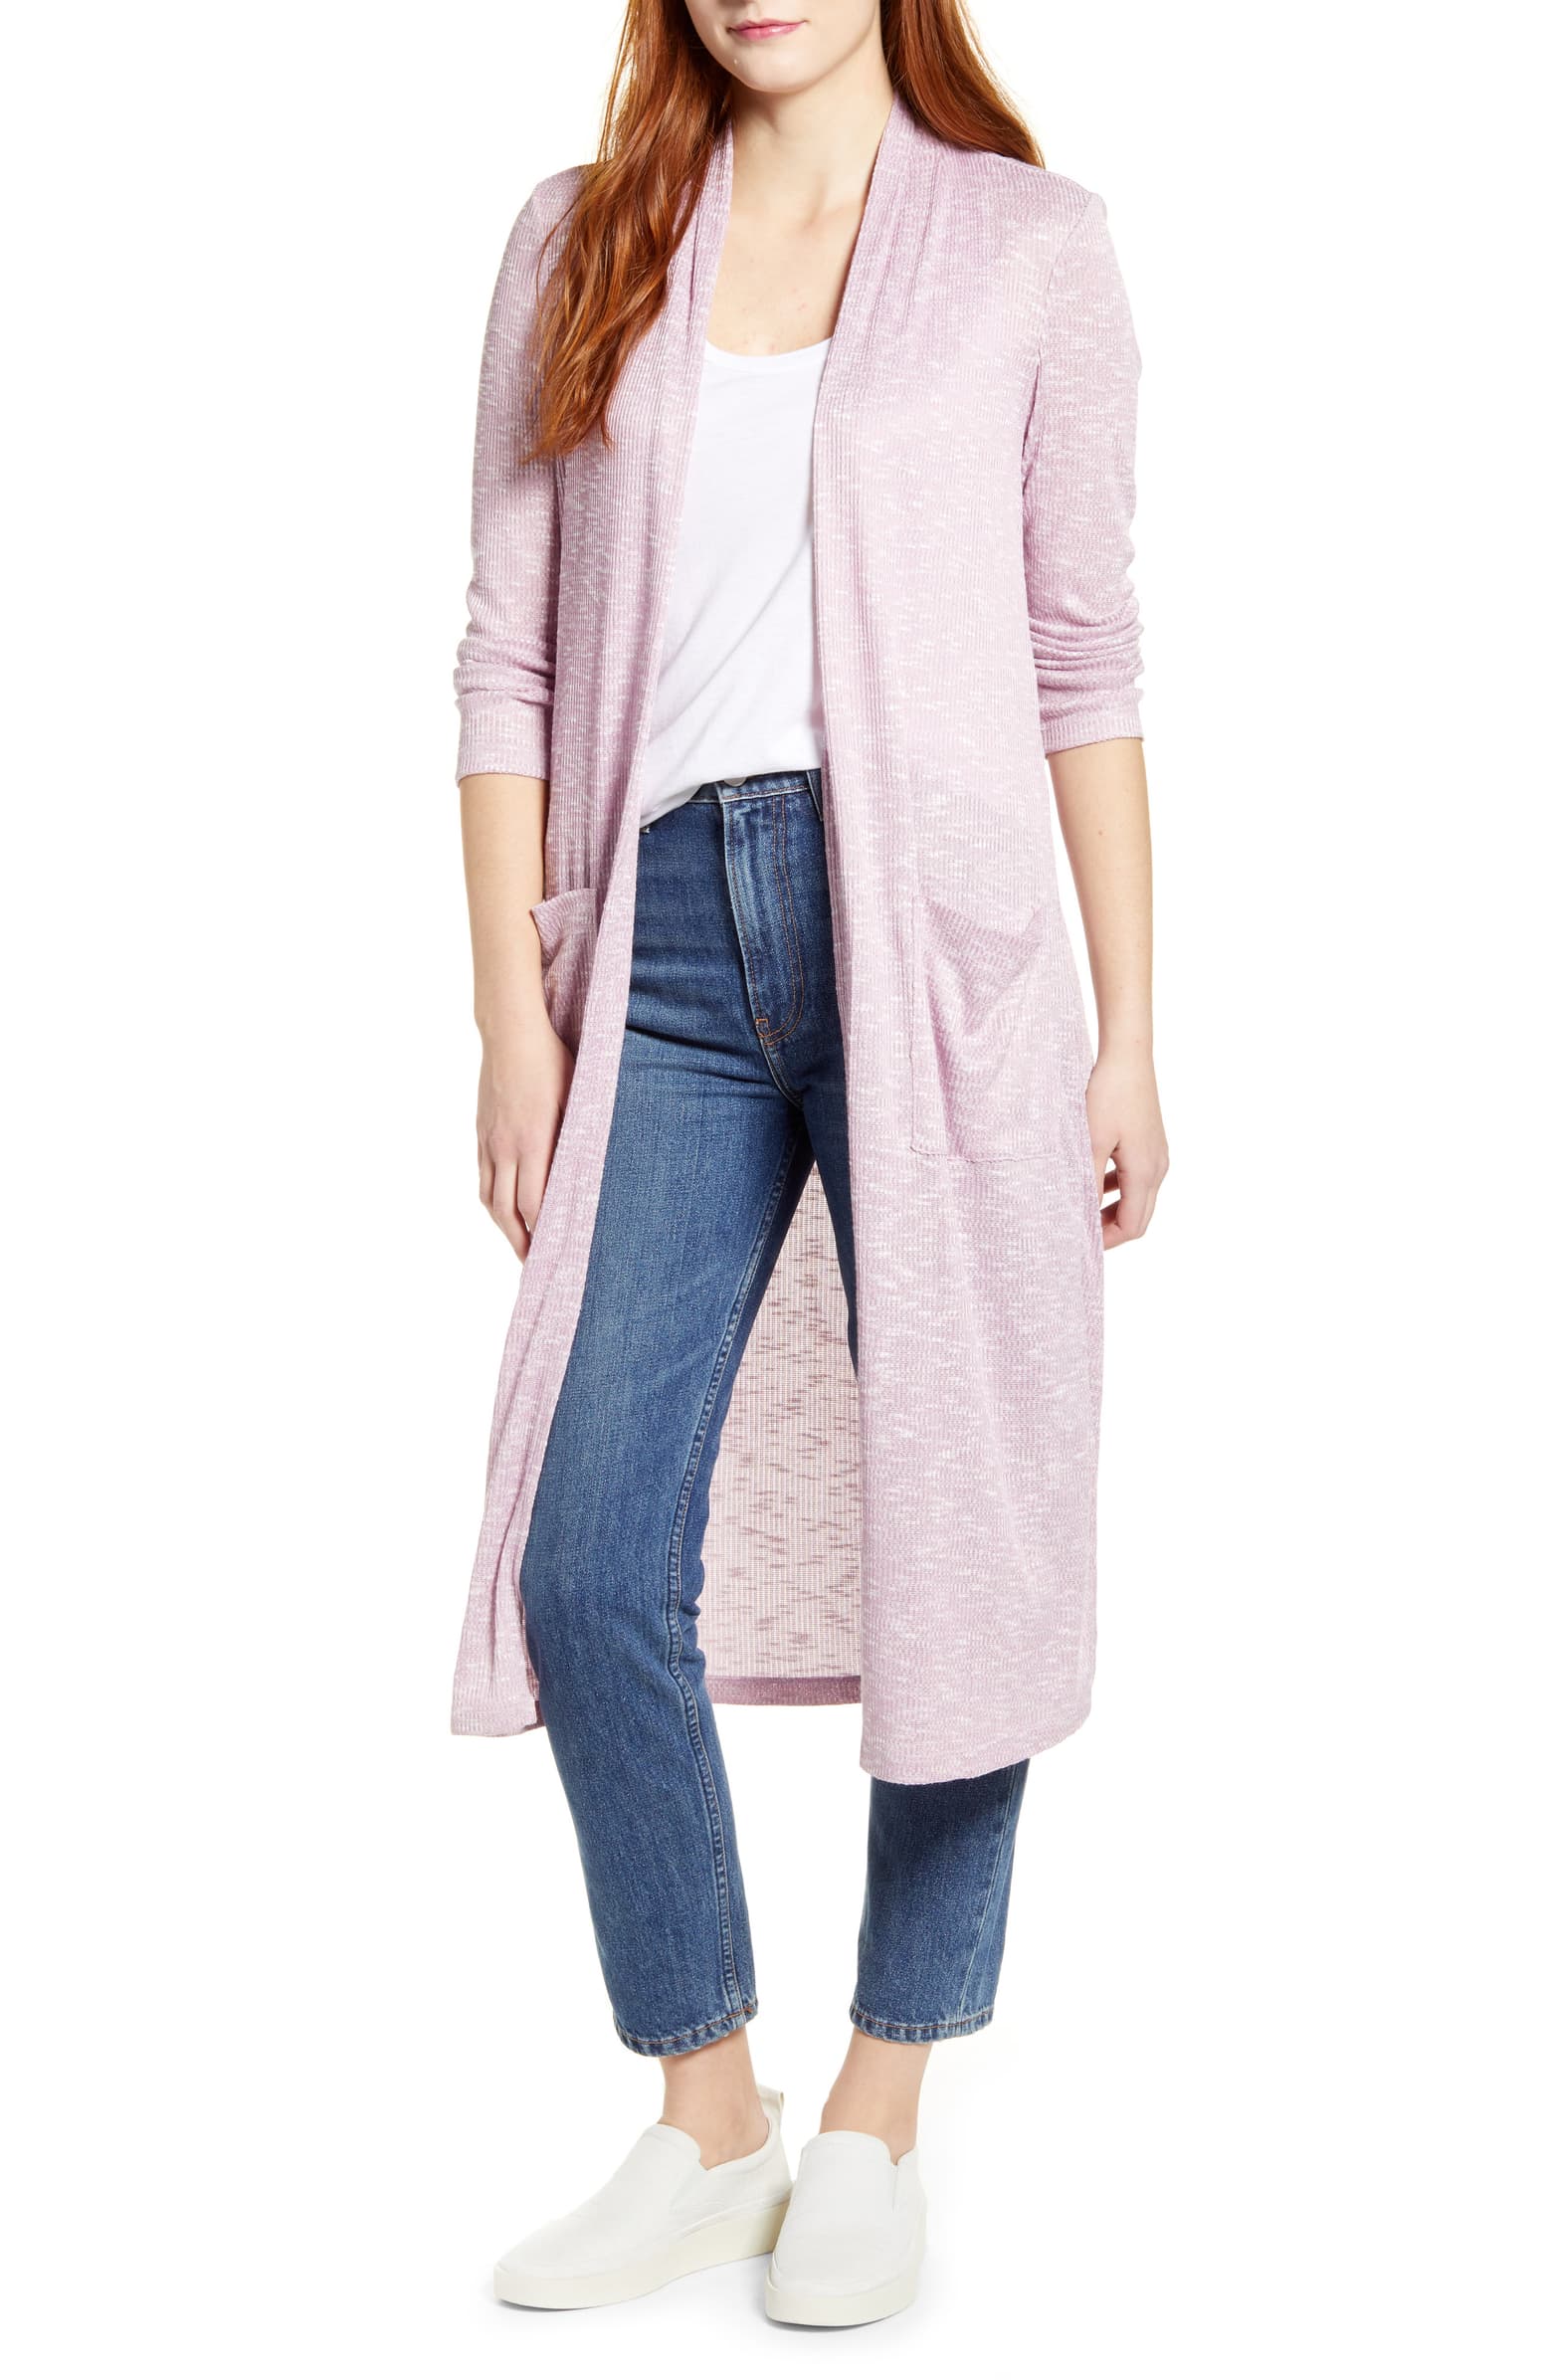 This Seriously Cute $24 Nordstrom Cardigan Will Instantly Dress Up Your ...